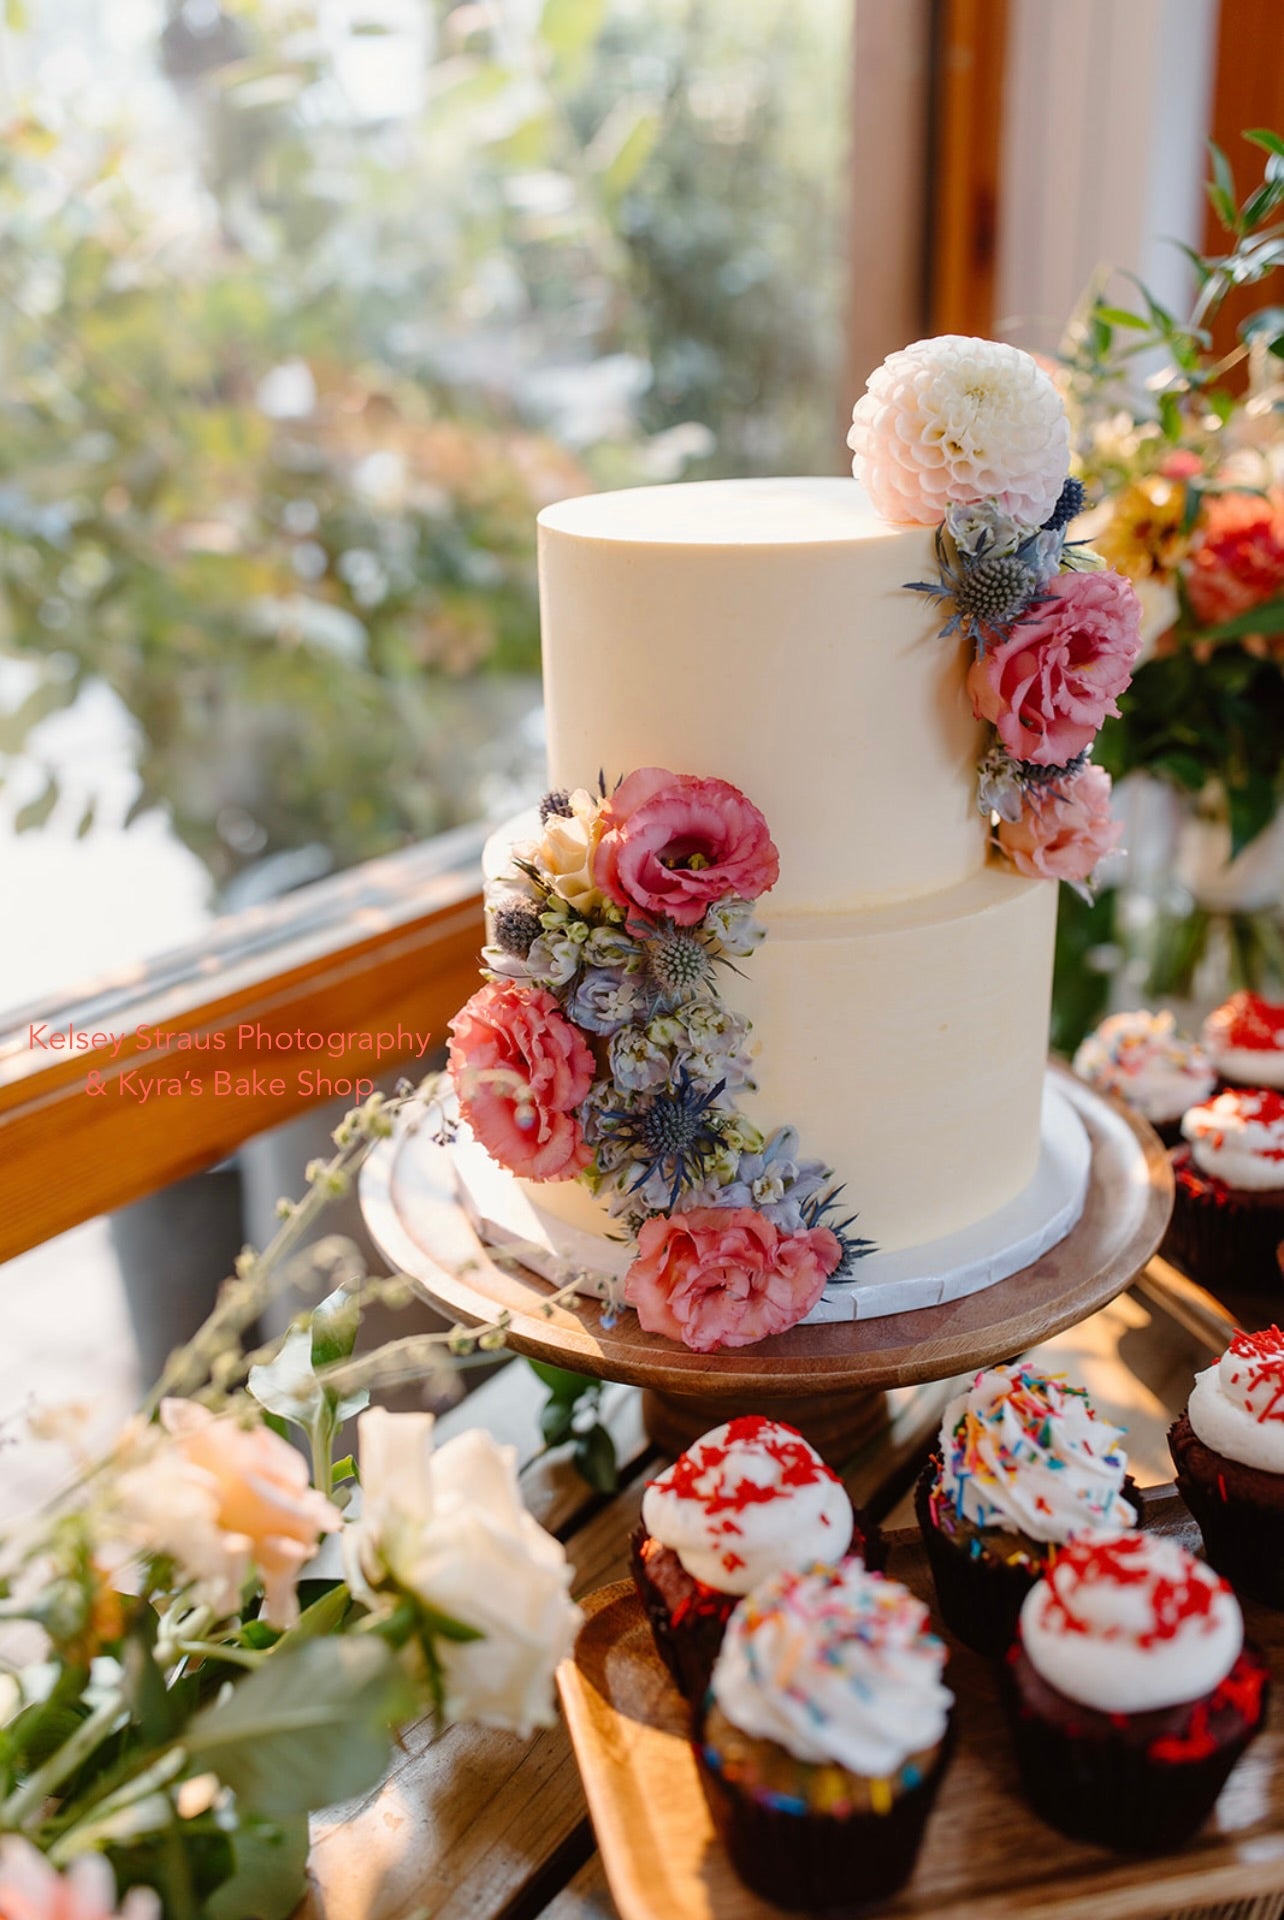 Wedding Cake Trends That Will Amaze Your Guests - Showtime Event Blog